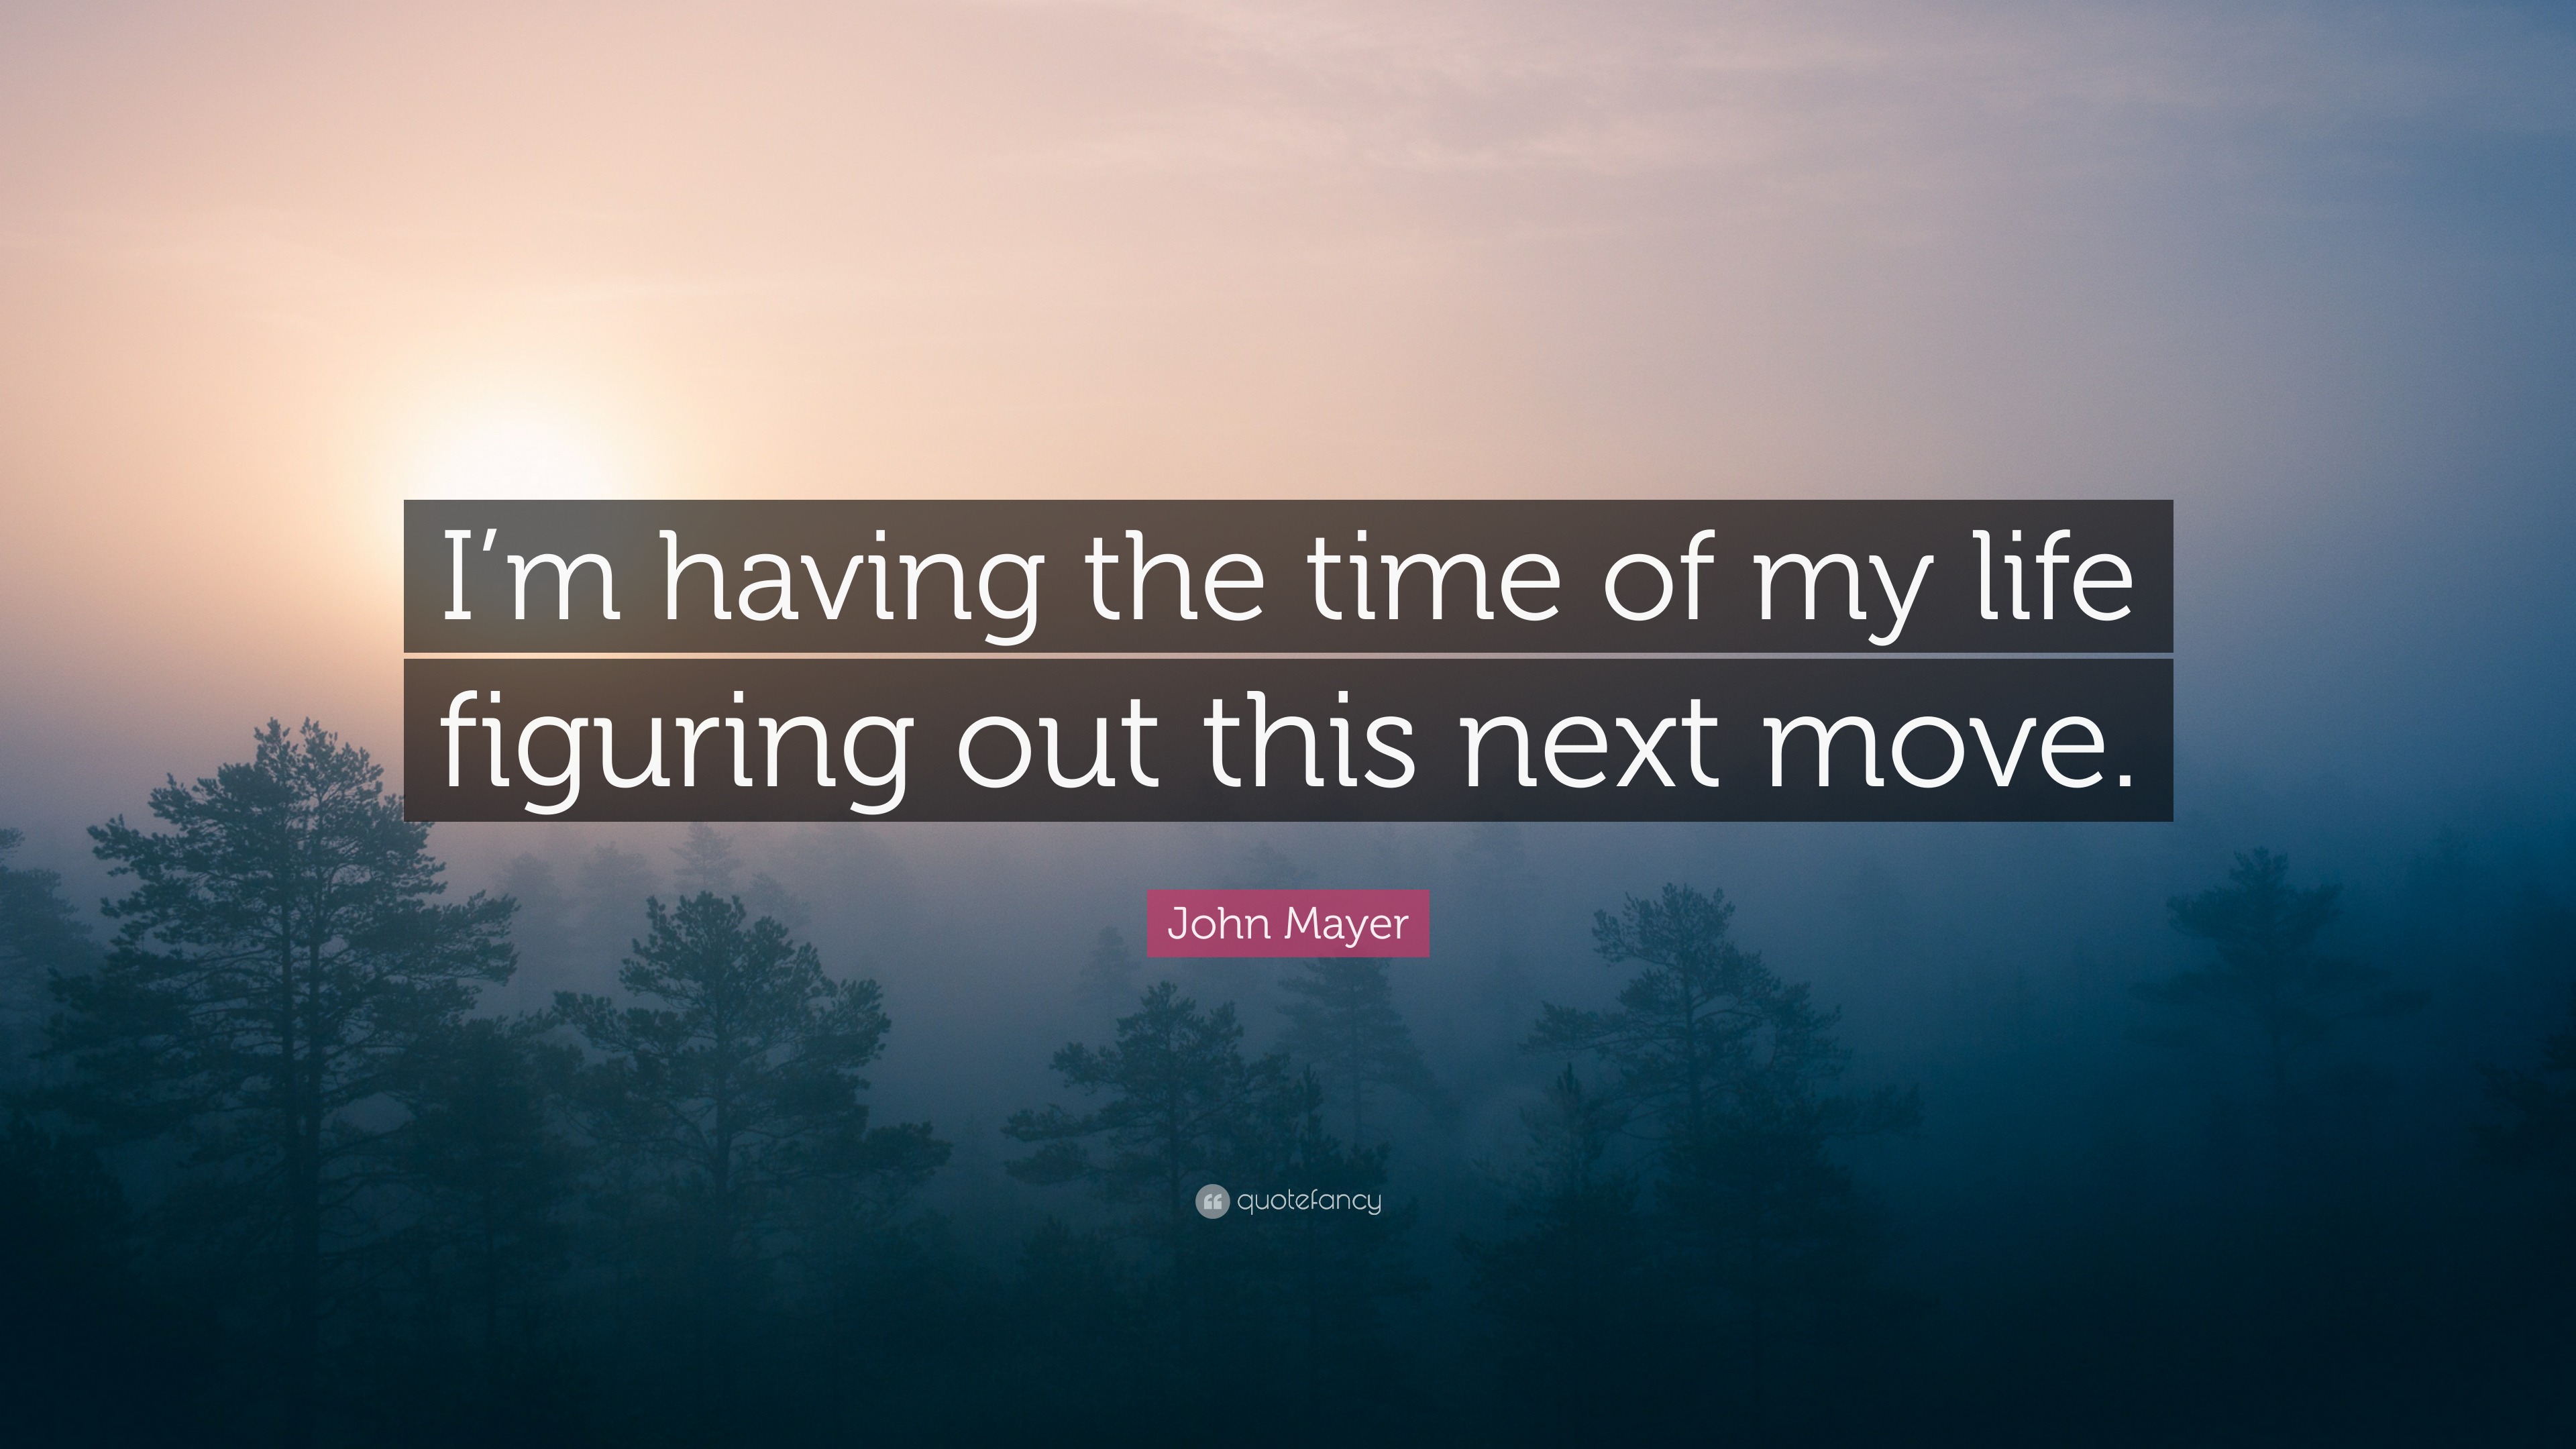 John Mayer Quote “I m having the time of my life figuring out